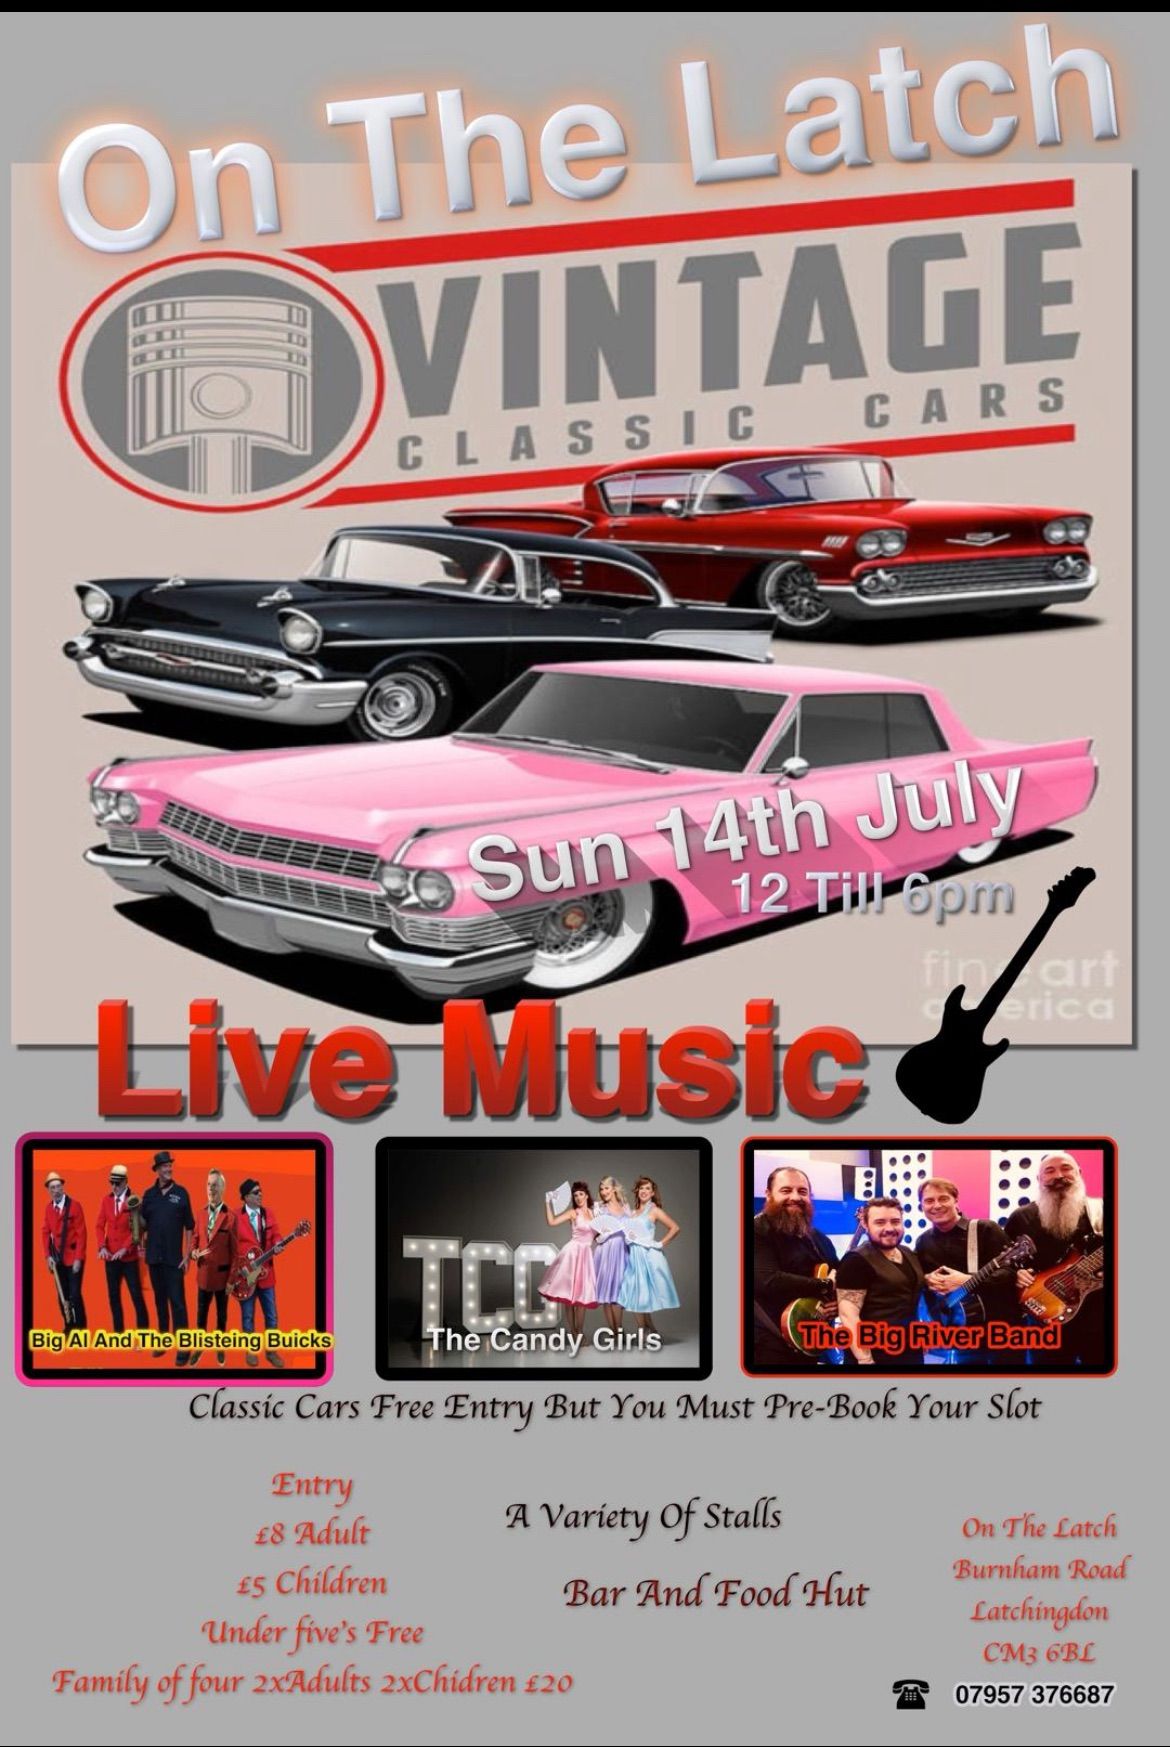 Music and Classic Car show day 